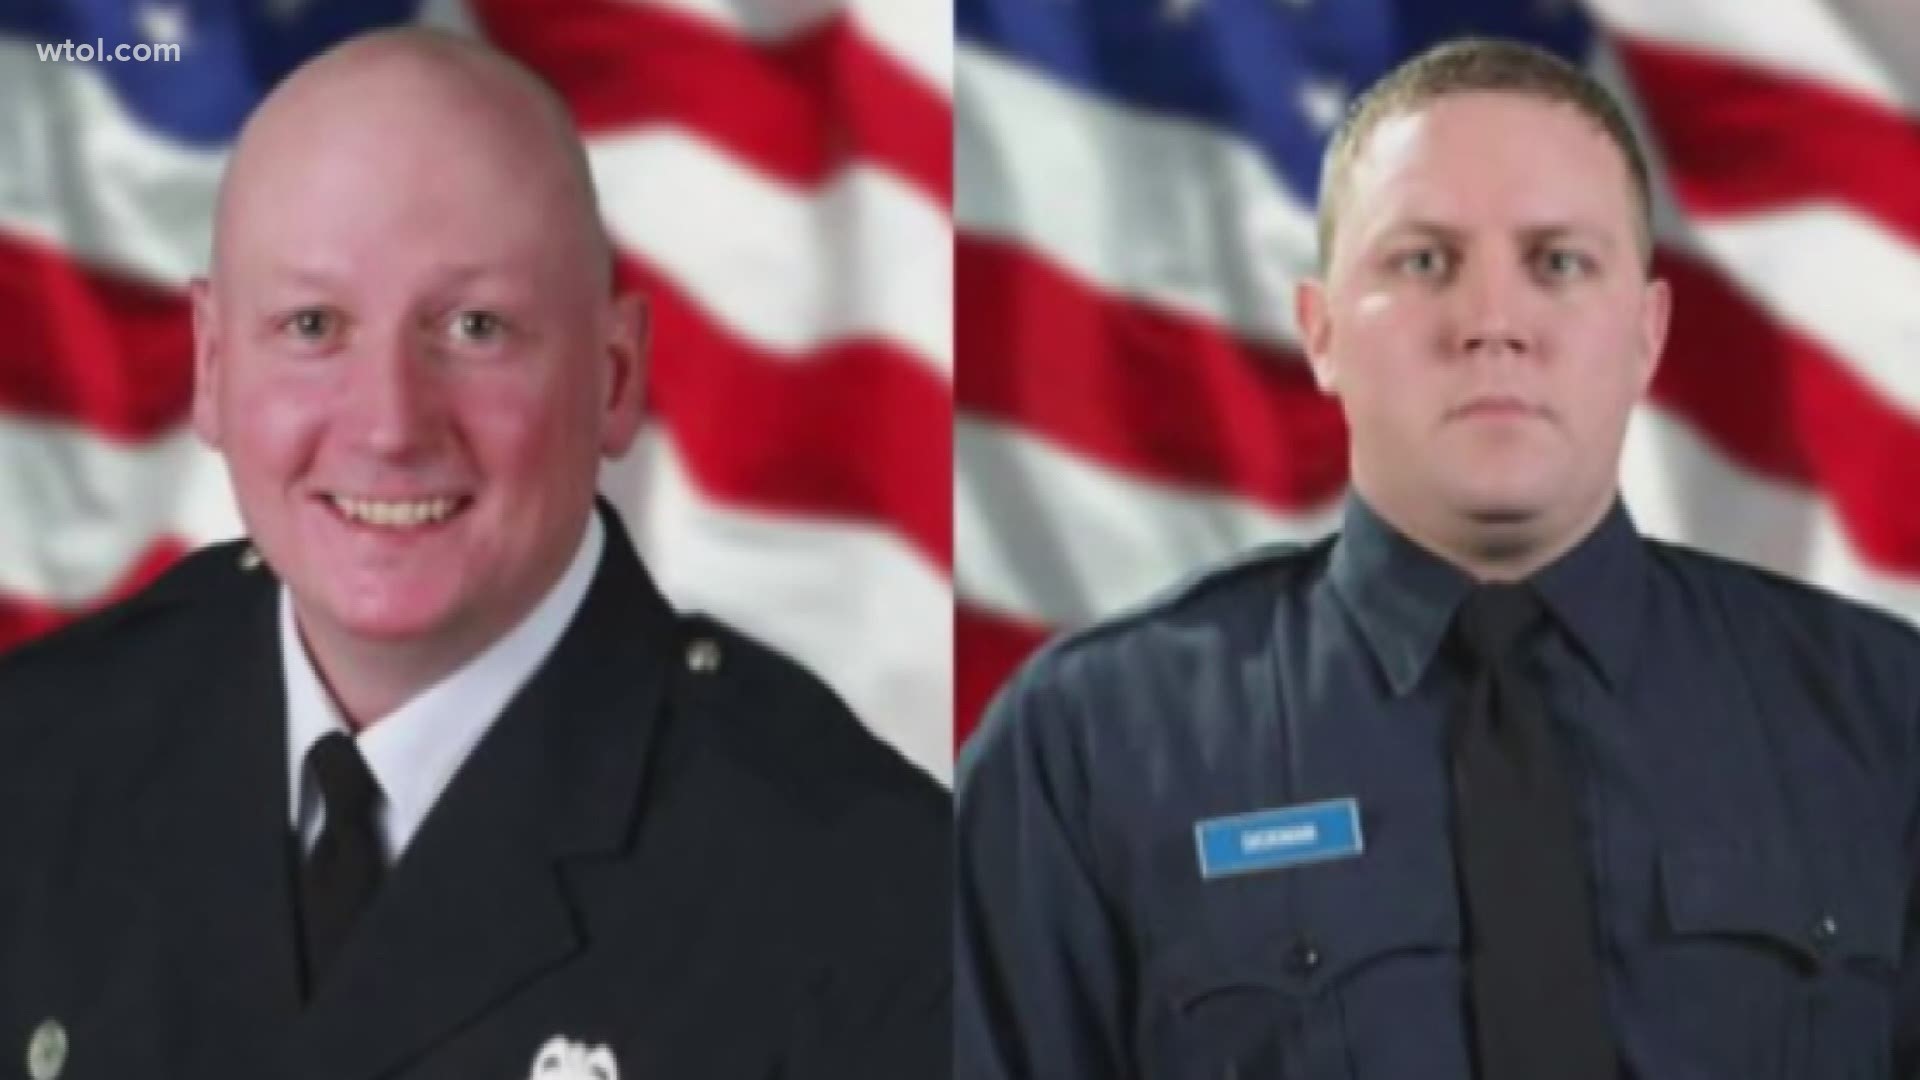 Historic Church of St. Patrick hosts service at 5:30 p.m. to remember Toledo Fire & Rescue Department firefighters Steve Machcinski and Jamie Dickman.